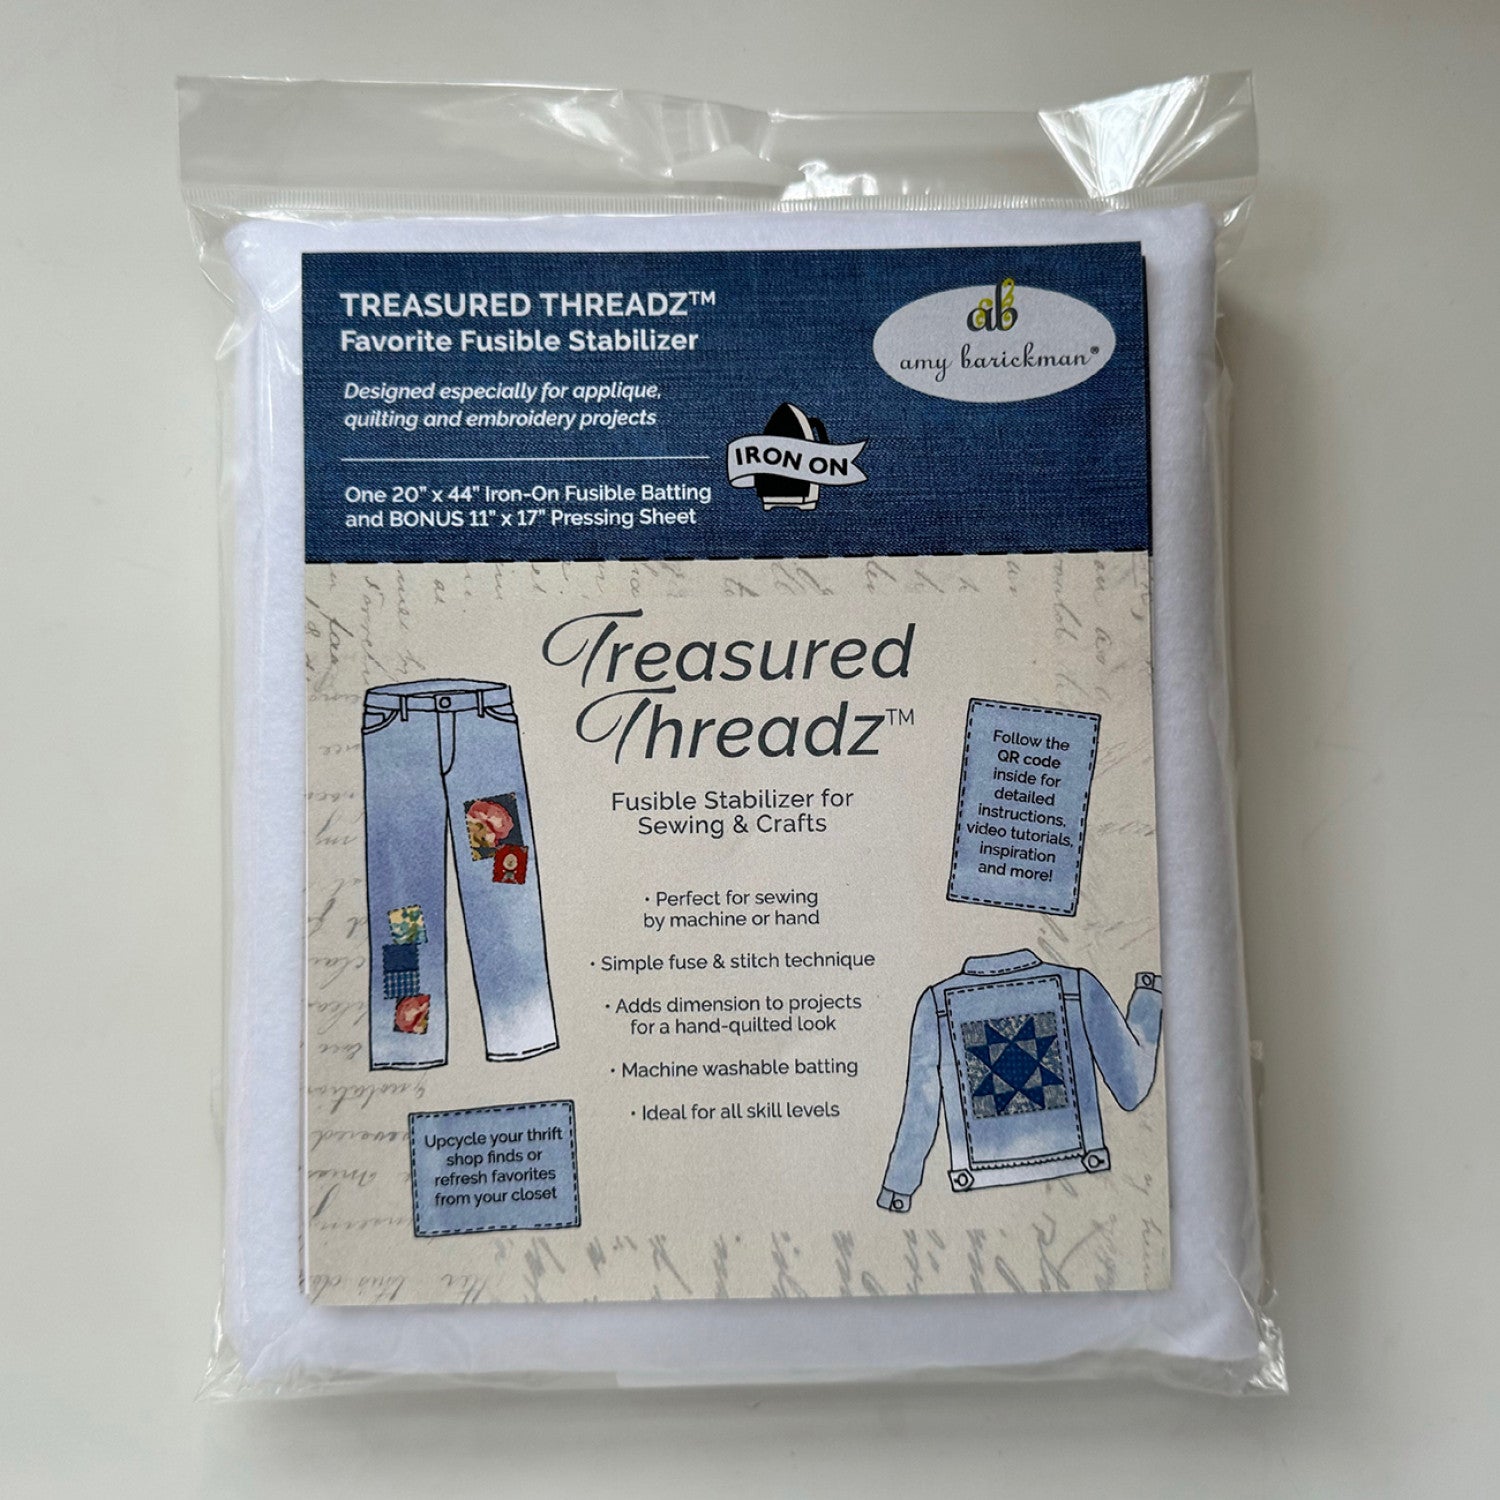 Light-Weight Fusible Stabilizer by Amy Barickman for Treasured Threadz